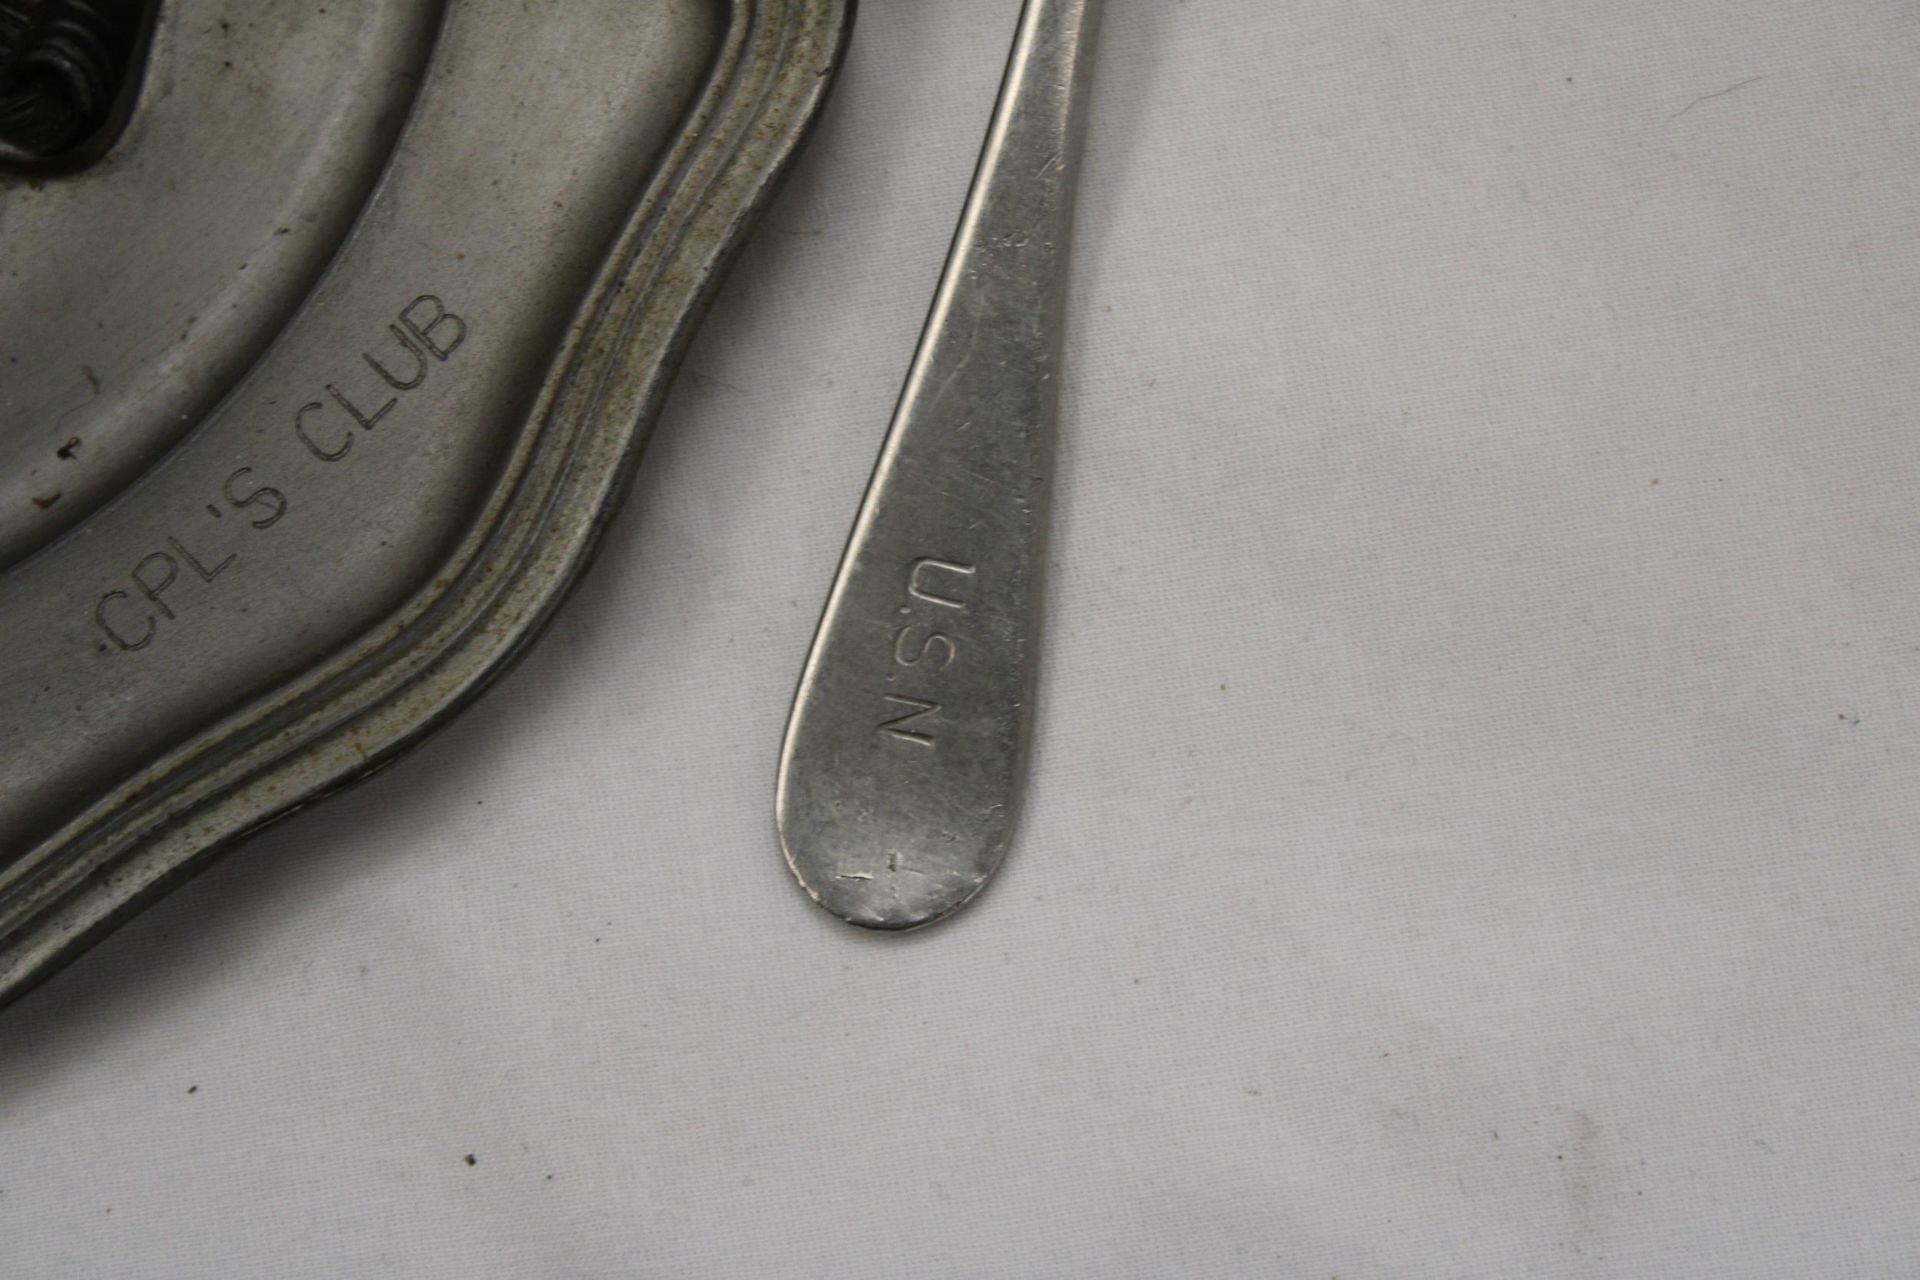 A VINTAGE PEWTER TRAY AND A UNITED STATES NAVY SPOON - Image 3 of 7